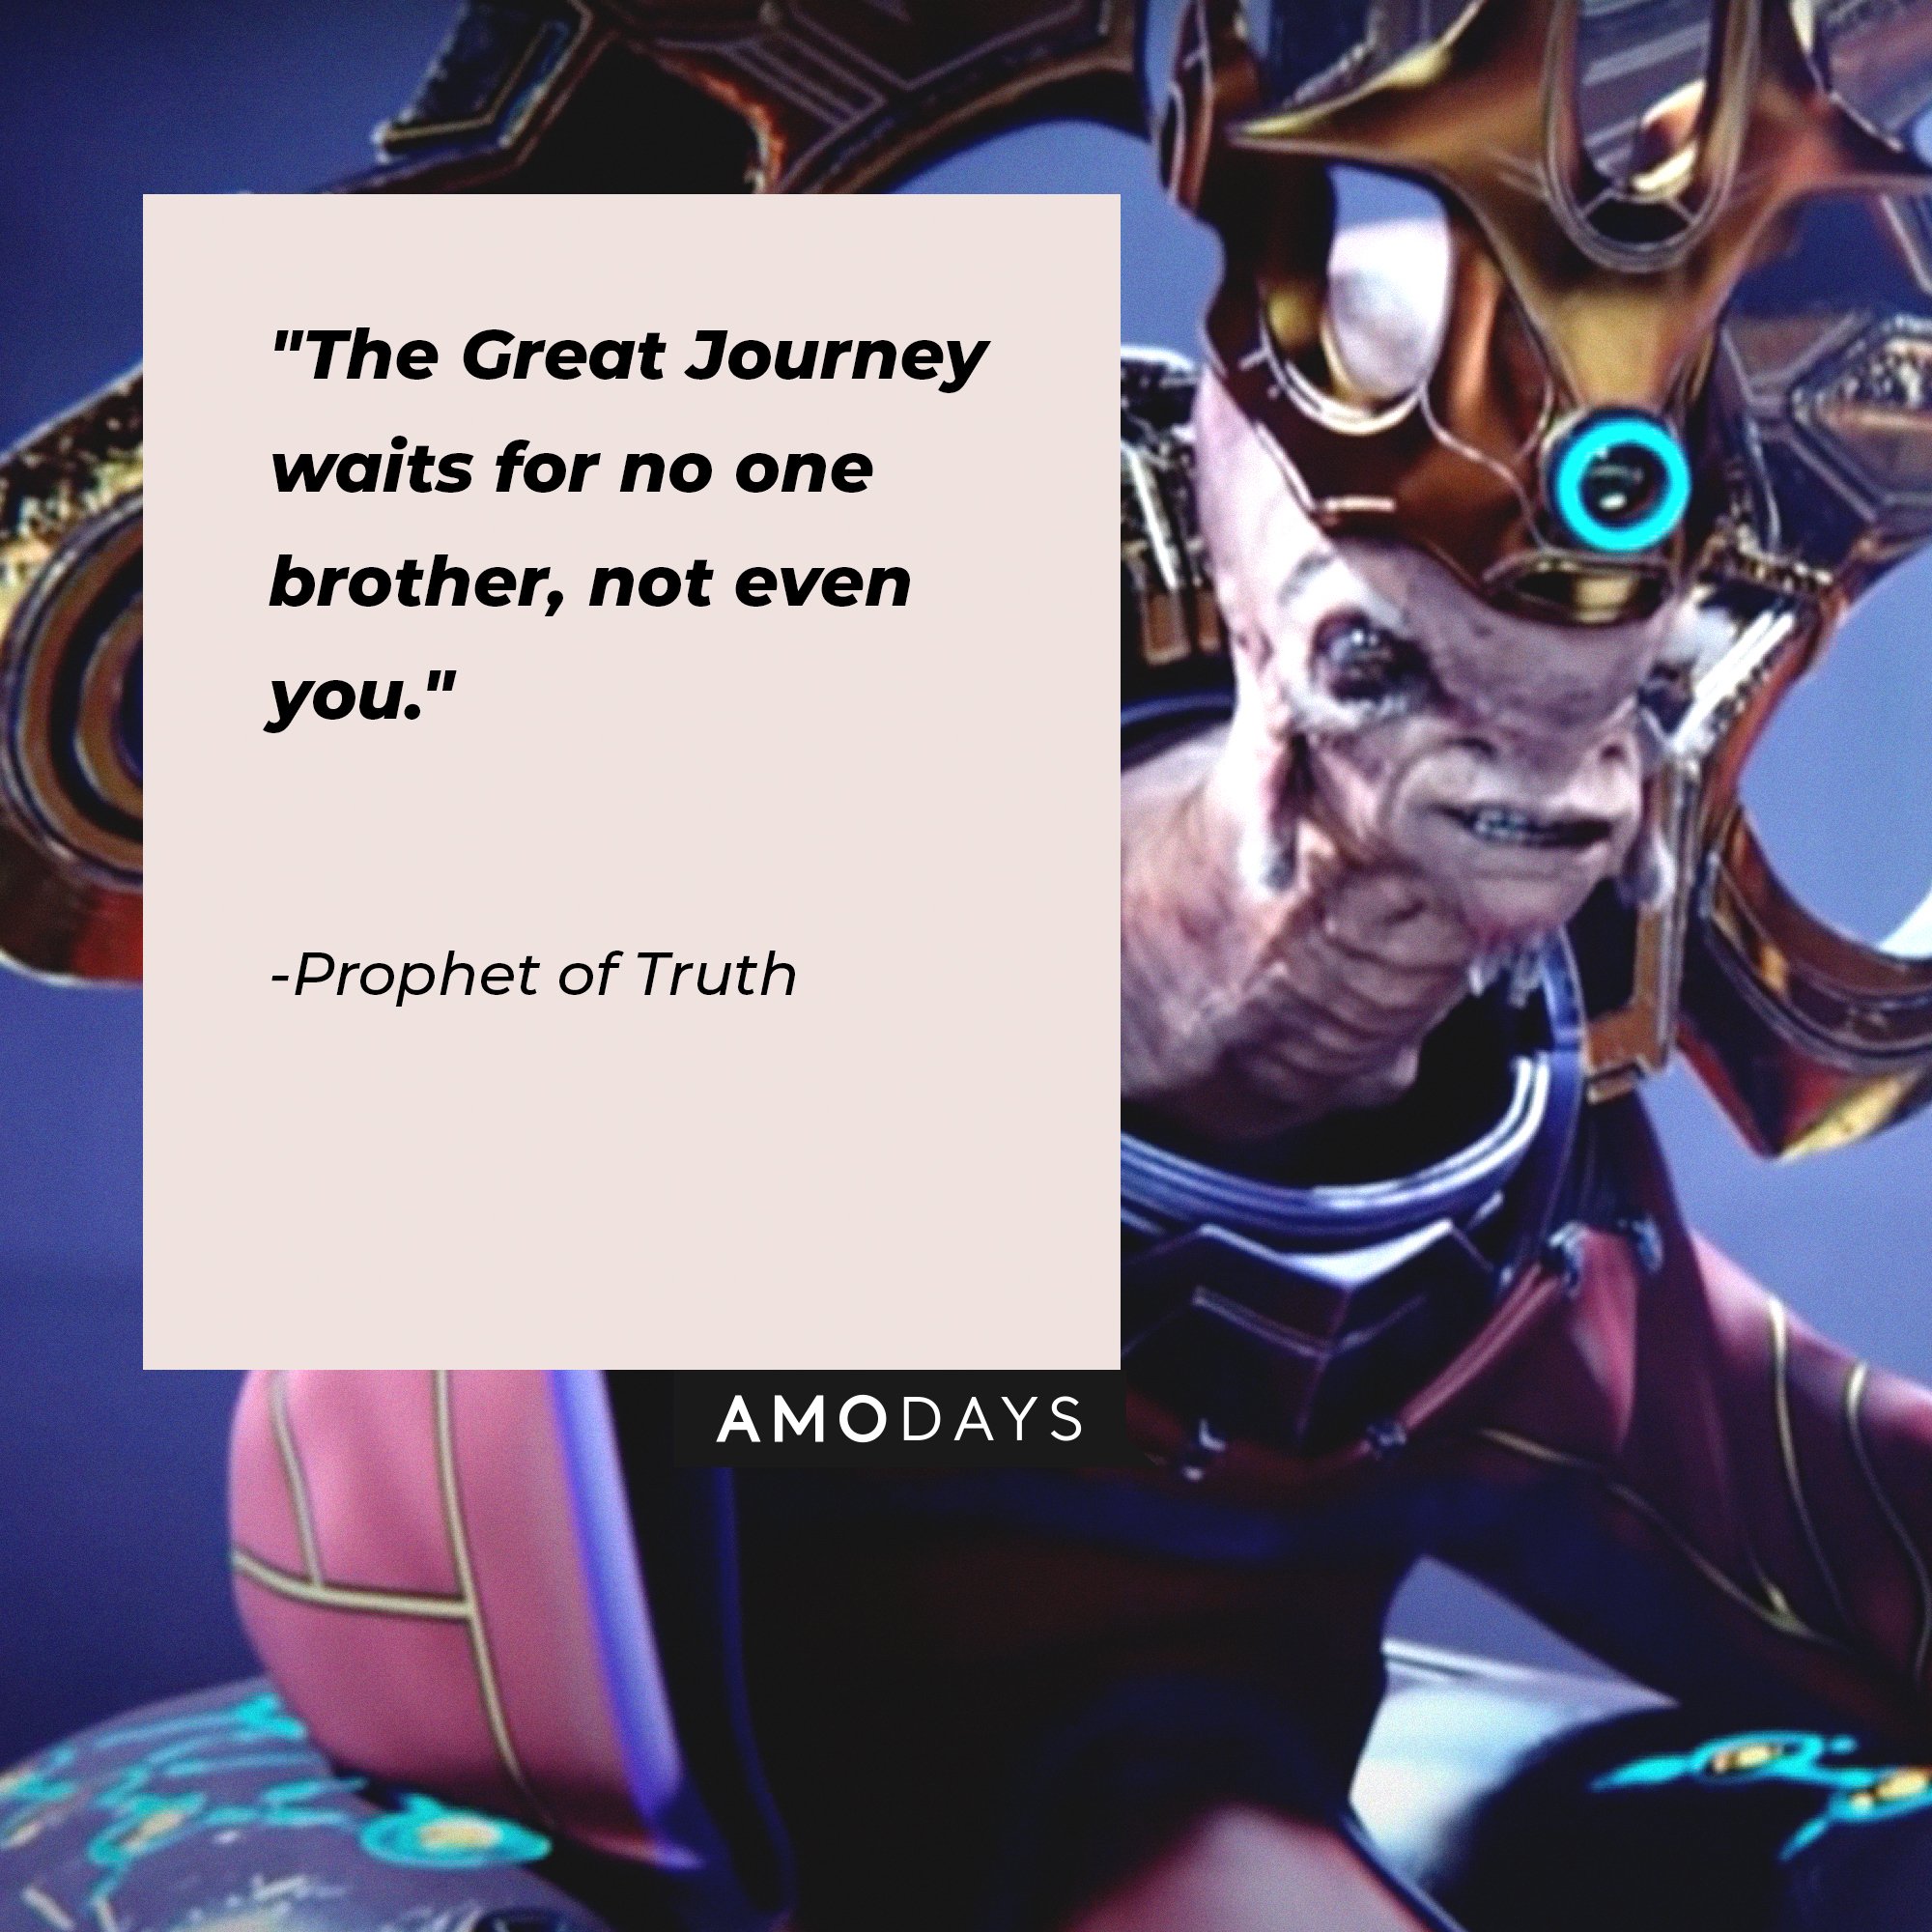 Prophet of Truth's quote: "The Great Journey waits for no one brother, not even you." | Image: AmoDays